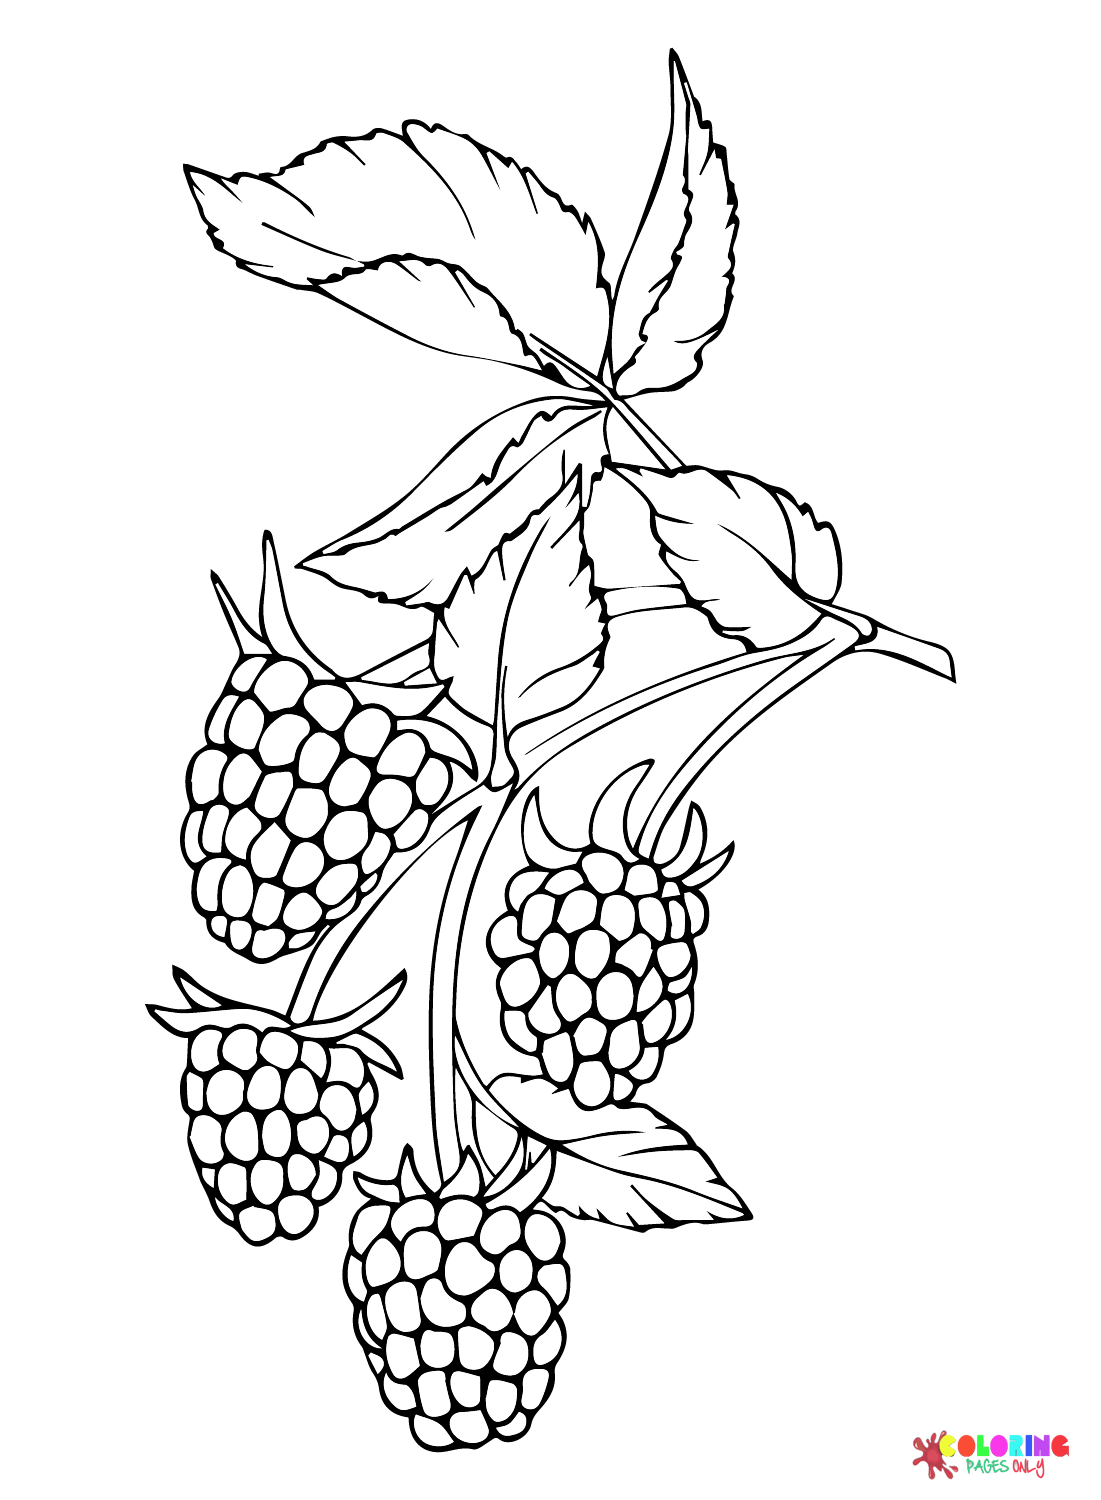 Blackberry Images Coloring Page